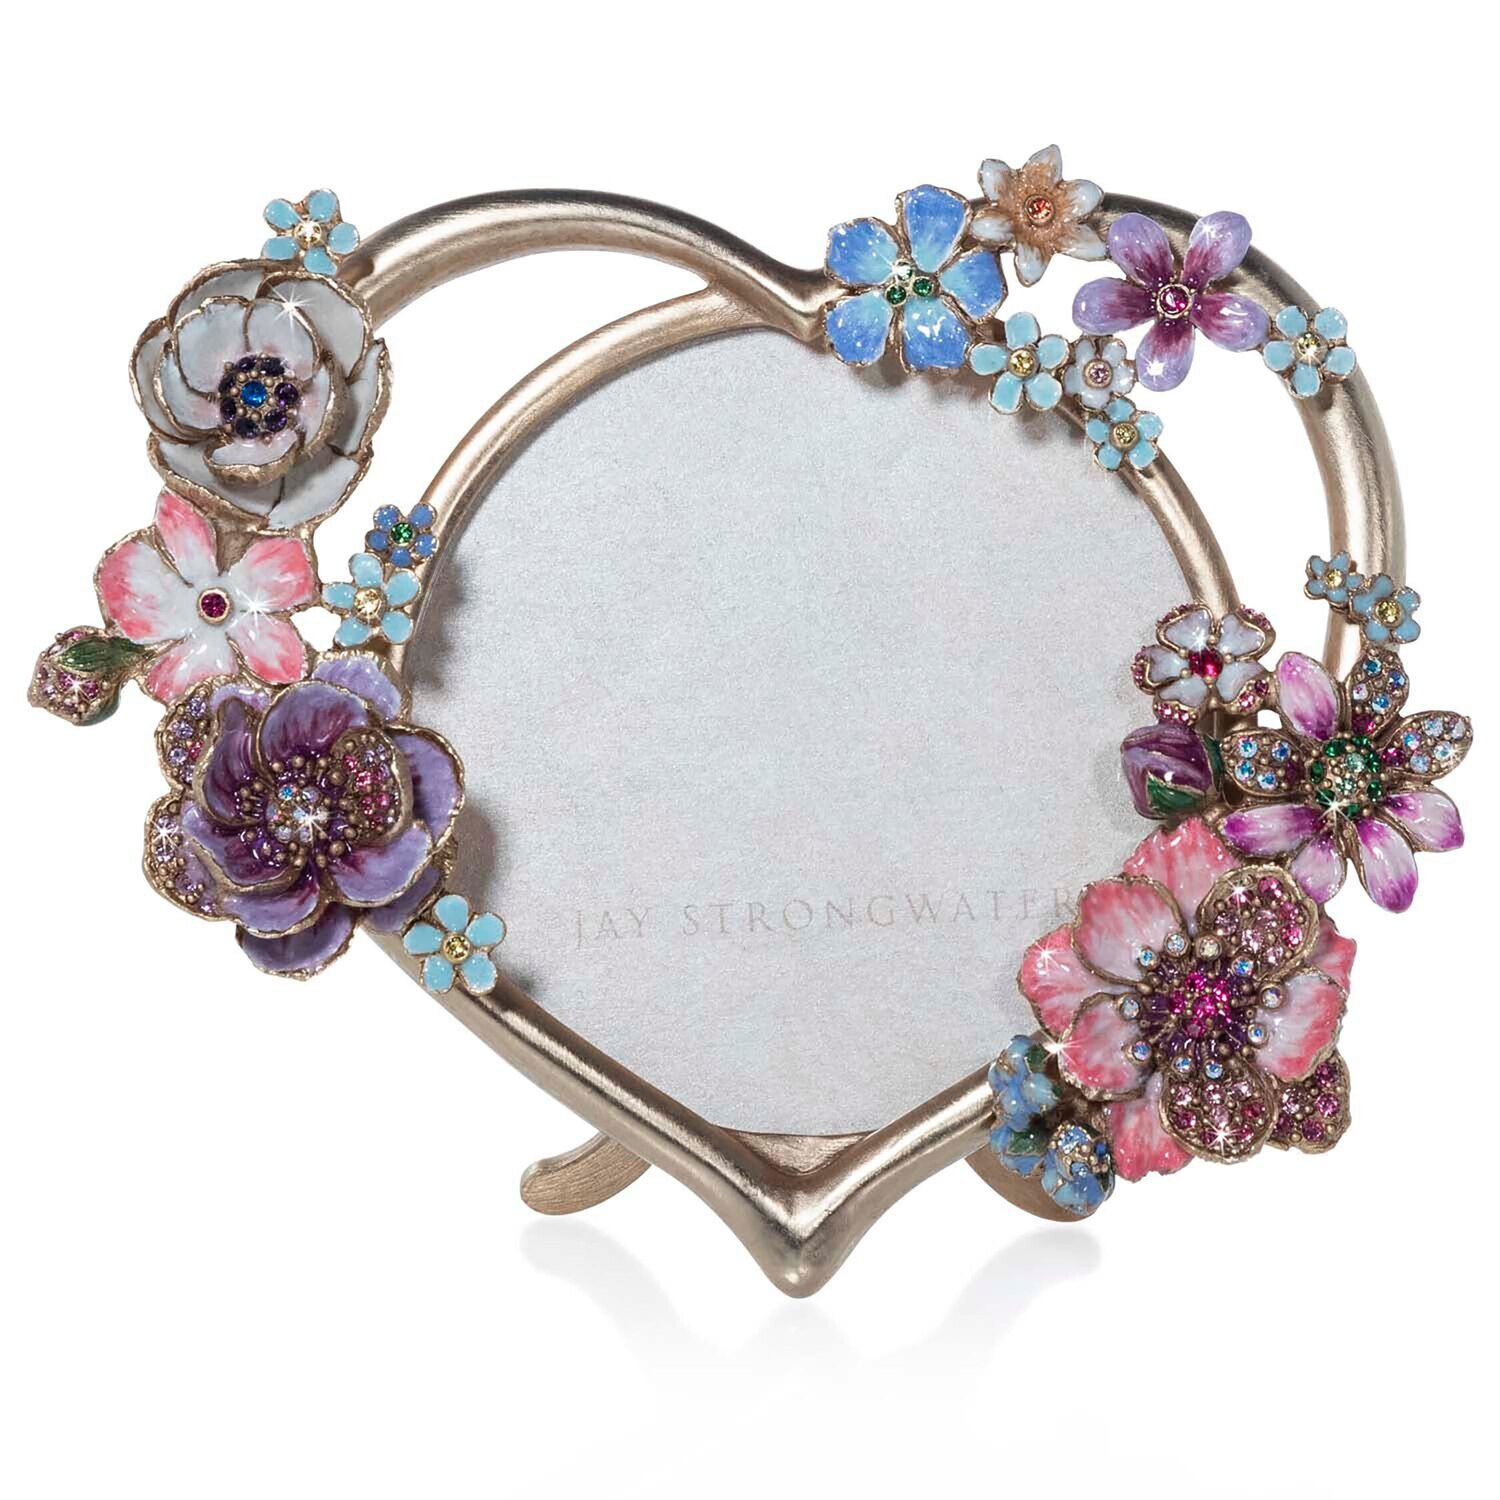 Jay Strongwater 4 Inch Round Bouquet Heart Picture Frame SPF5885-256